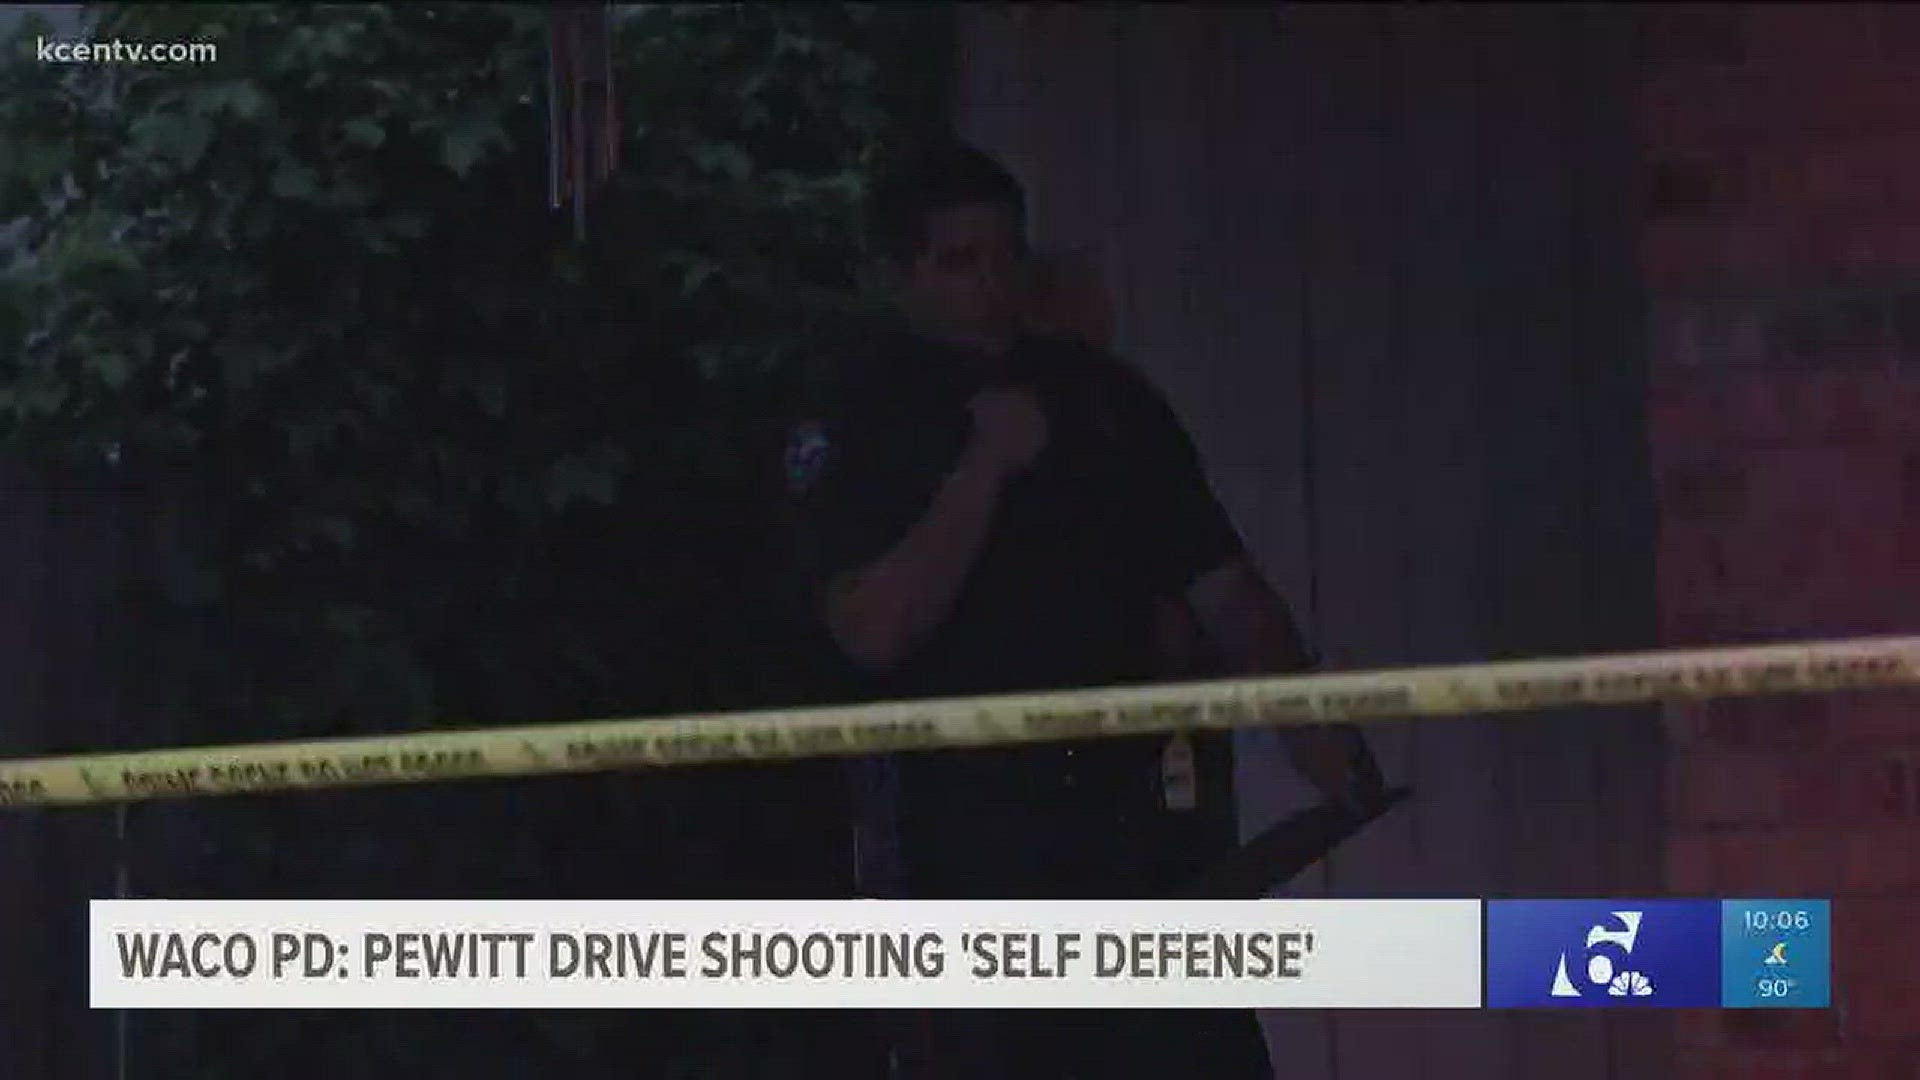 The shooting on Pewitt Drive was a case of self-defense.